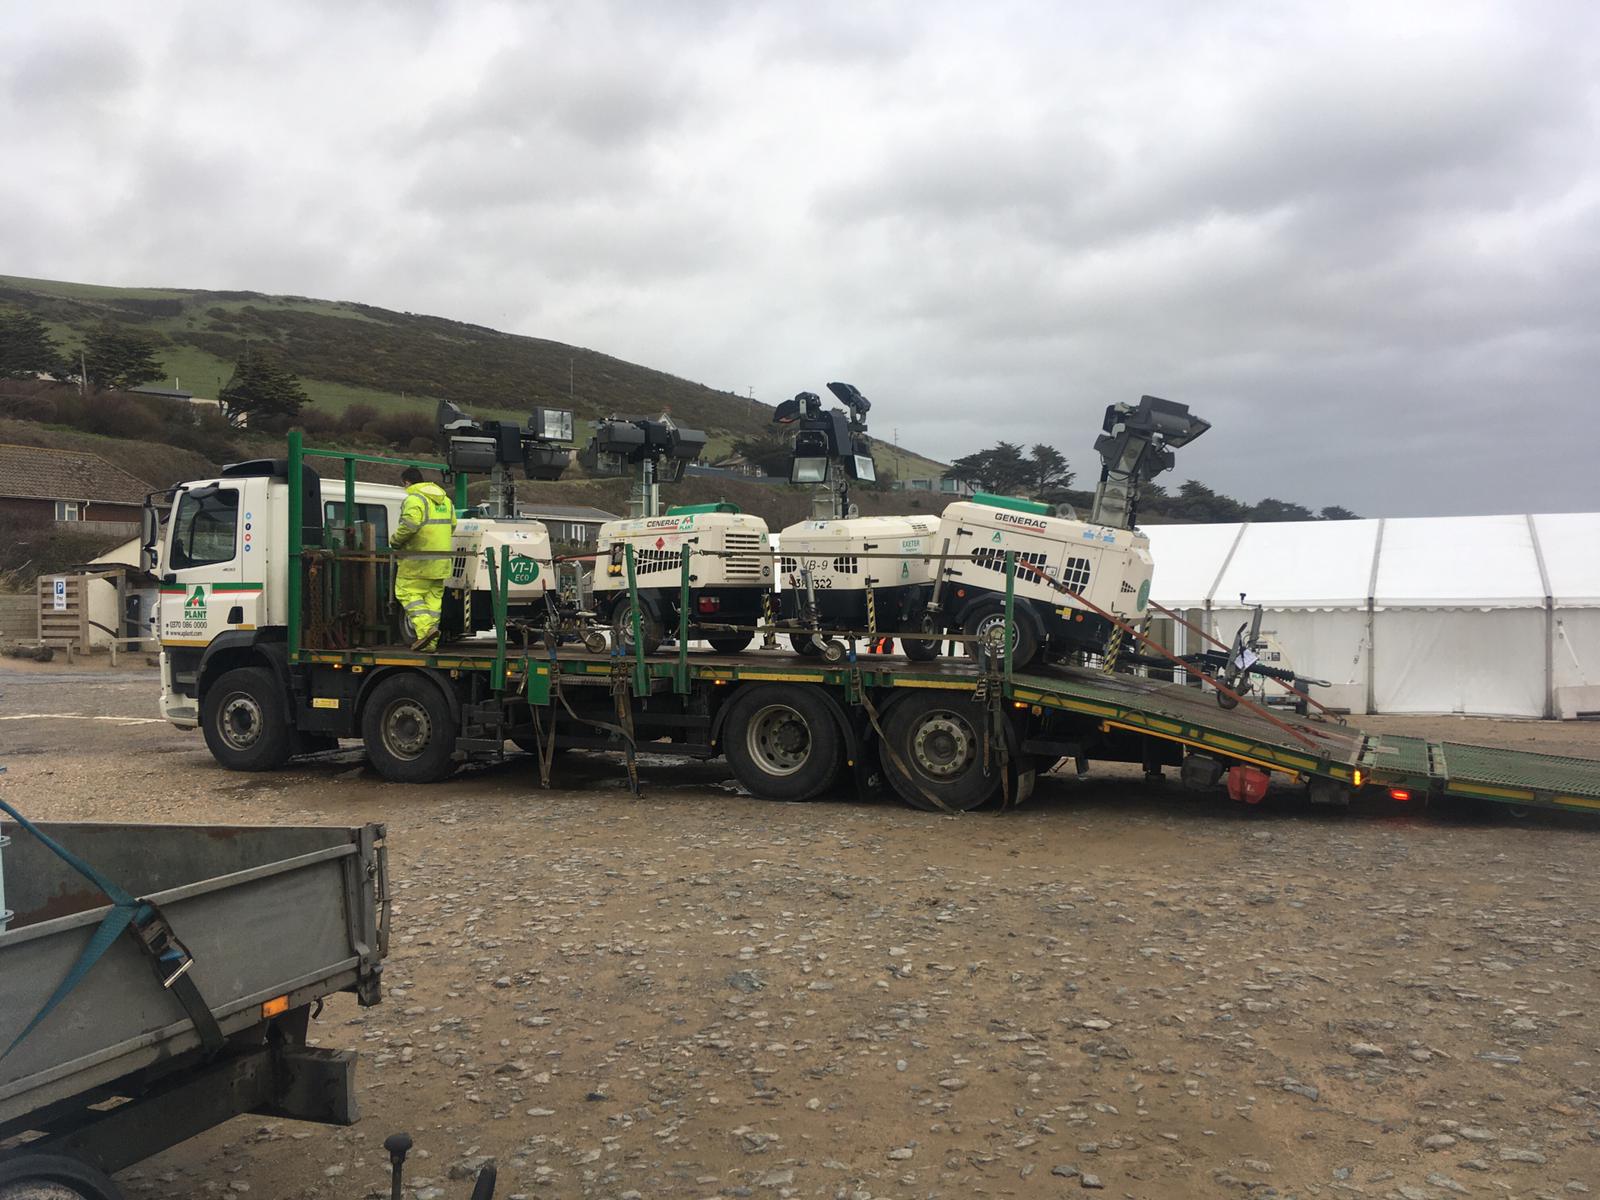 Mobile Lighting Towers On Back Of Transport